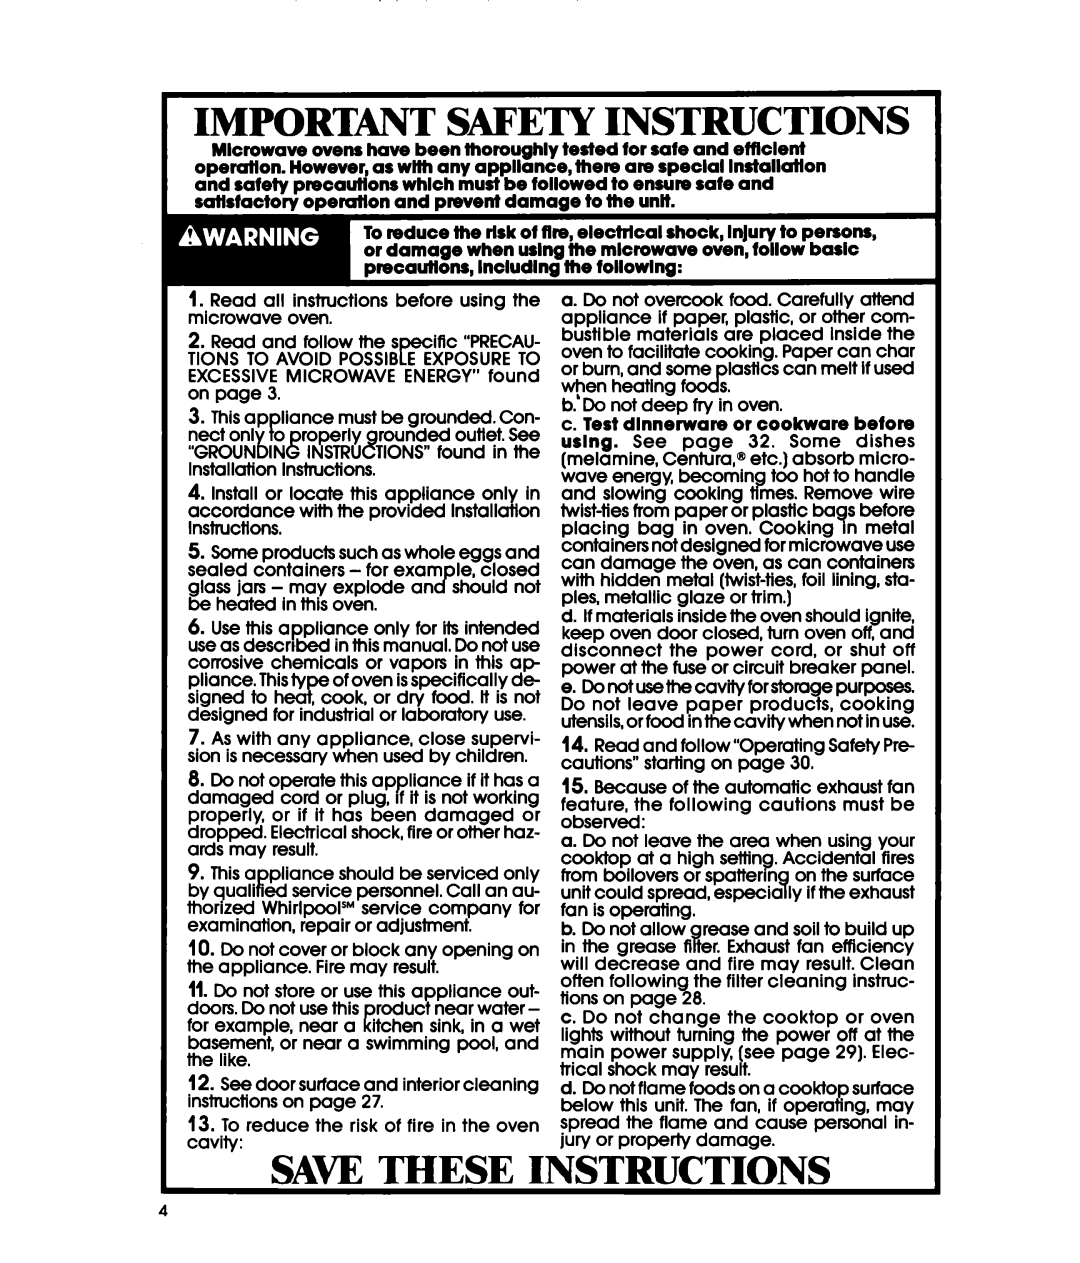 Whirlpool MH6700XW-1, MH6701XW-1 manual Important Safety Instructions, Saw These Instructions 